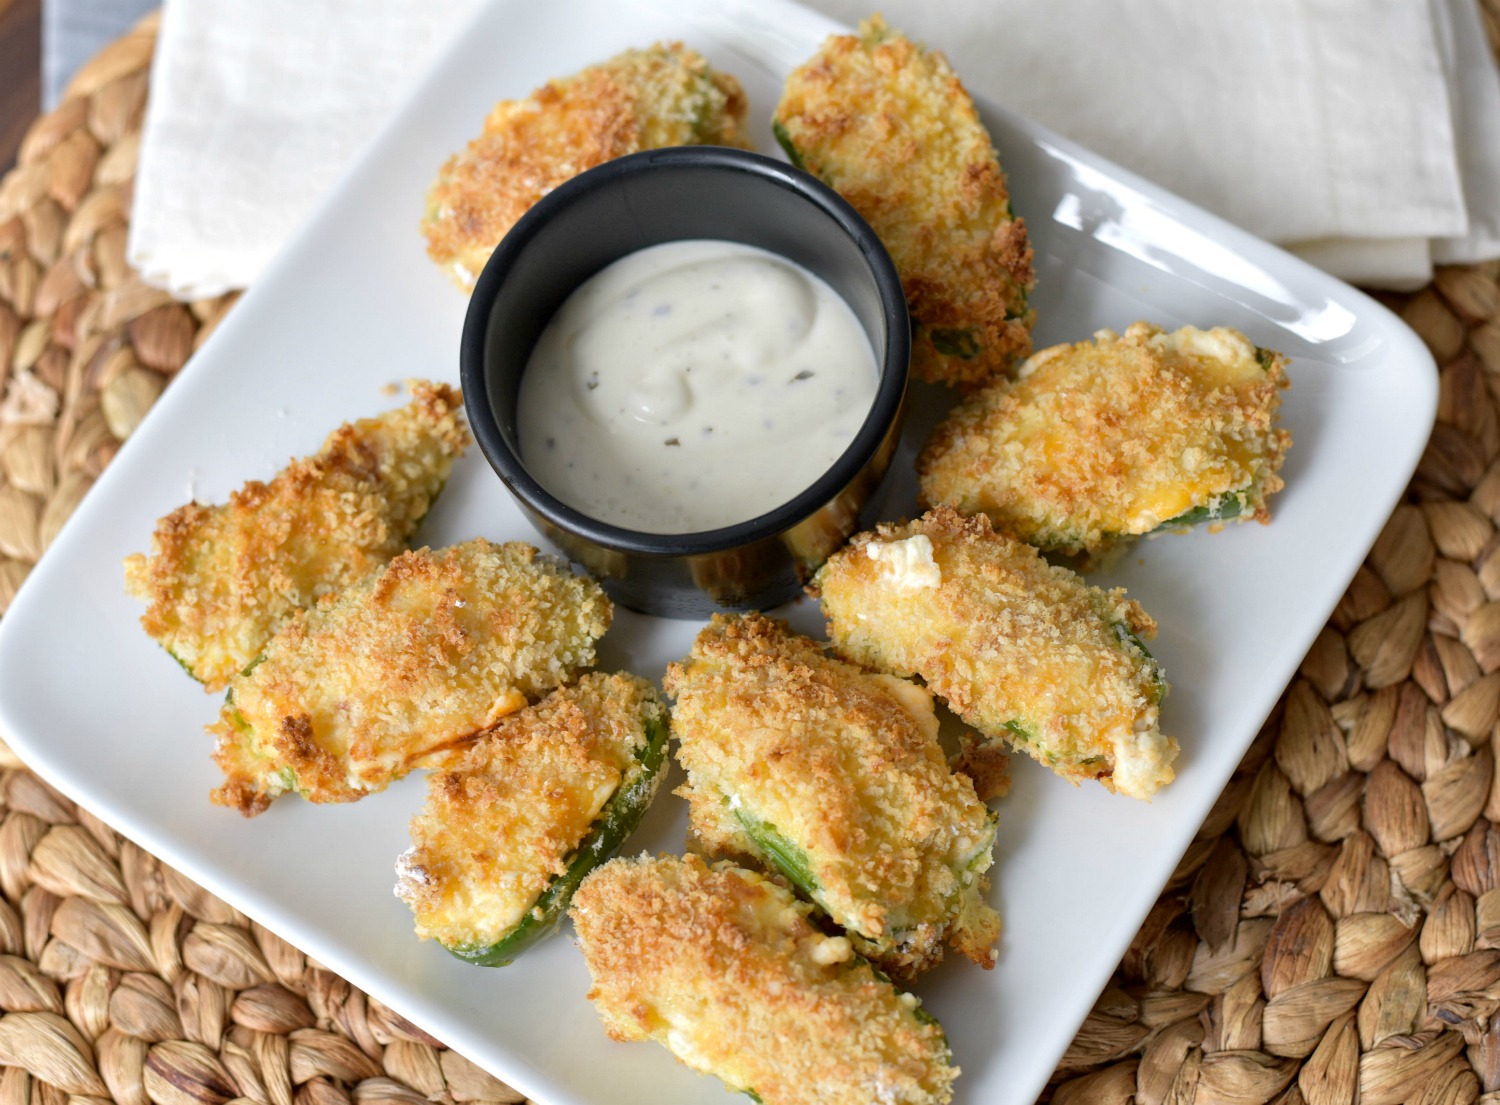 Looking for an easy appetizer? Try these Spicy Sweet Air Fryer Jalapeño Poppers! Ready in under 20 minutes, these crispy small bites are stuffed with cream cheese, cheddar, bacon, and jalapeño jelly.